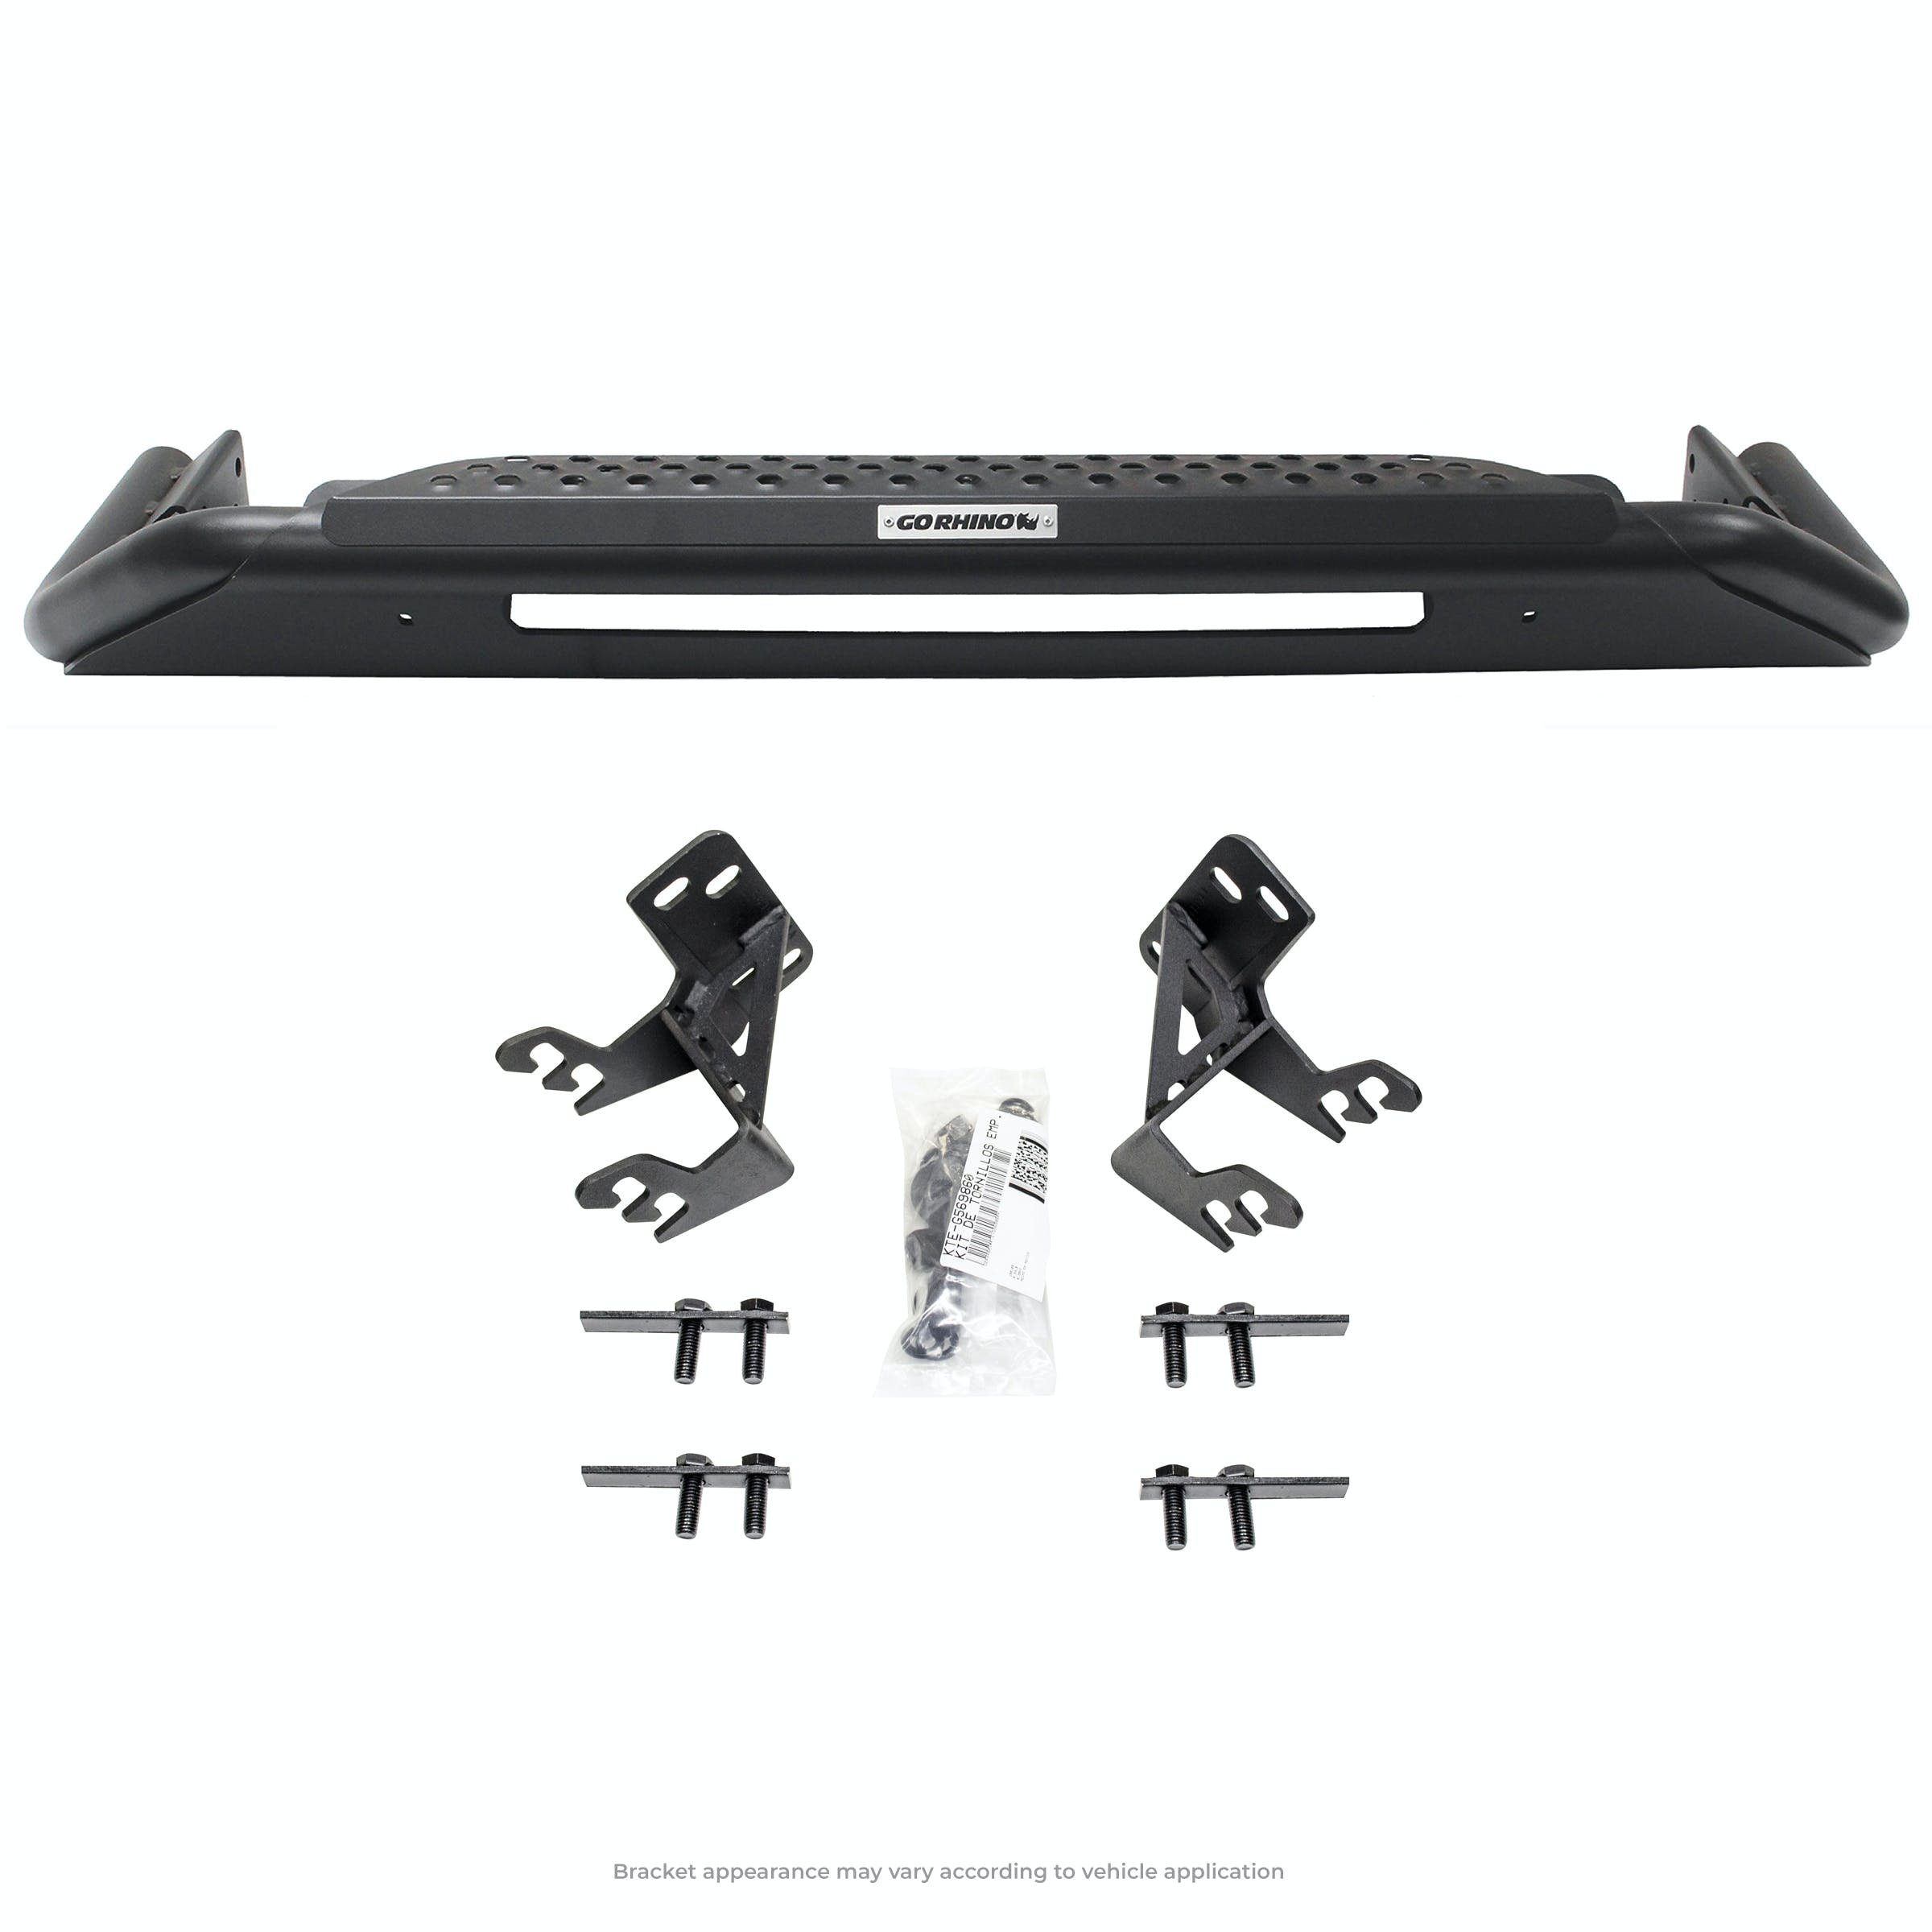 Go Rhino 566860T RC3 LR - Complete kit: Front guard + Brackets